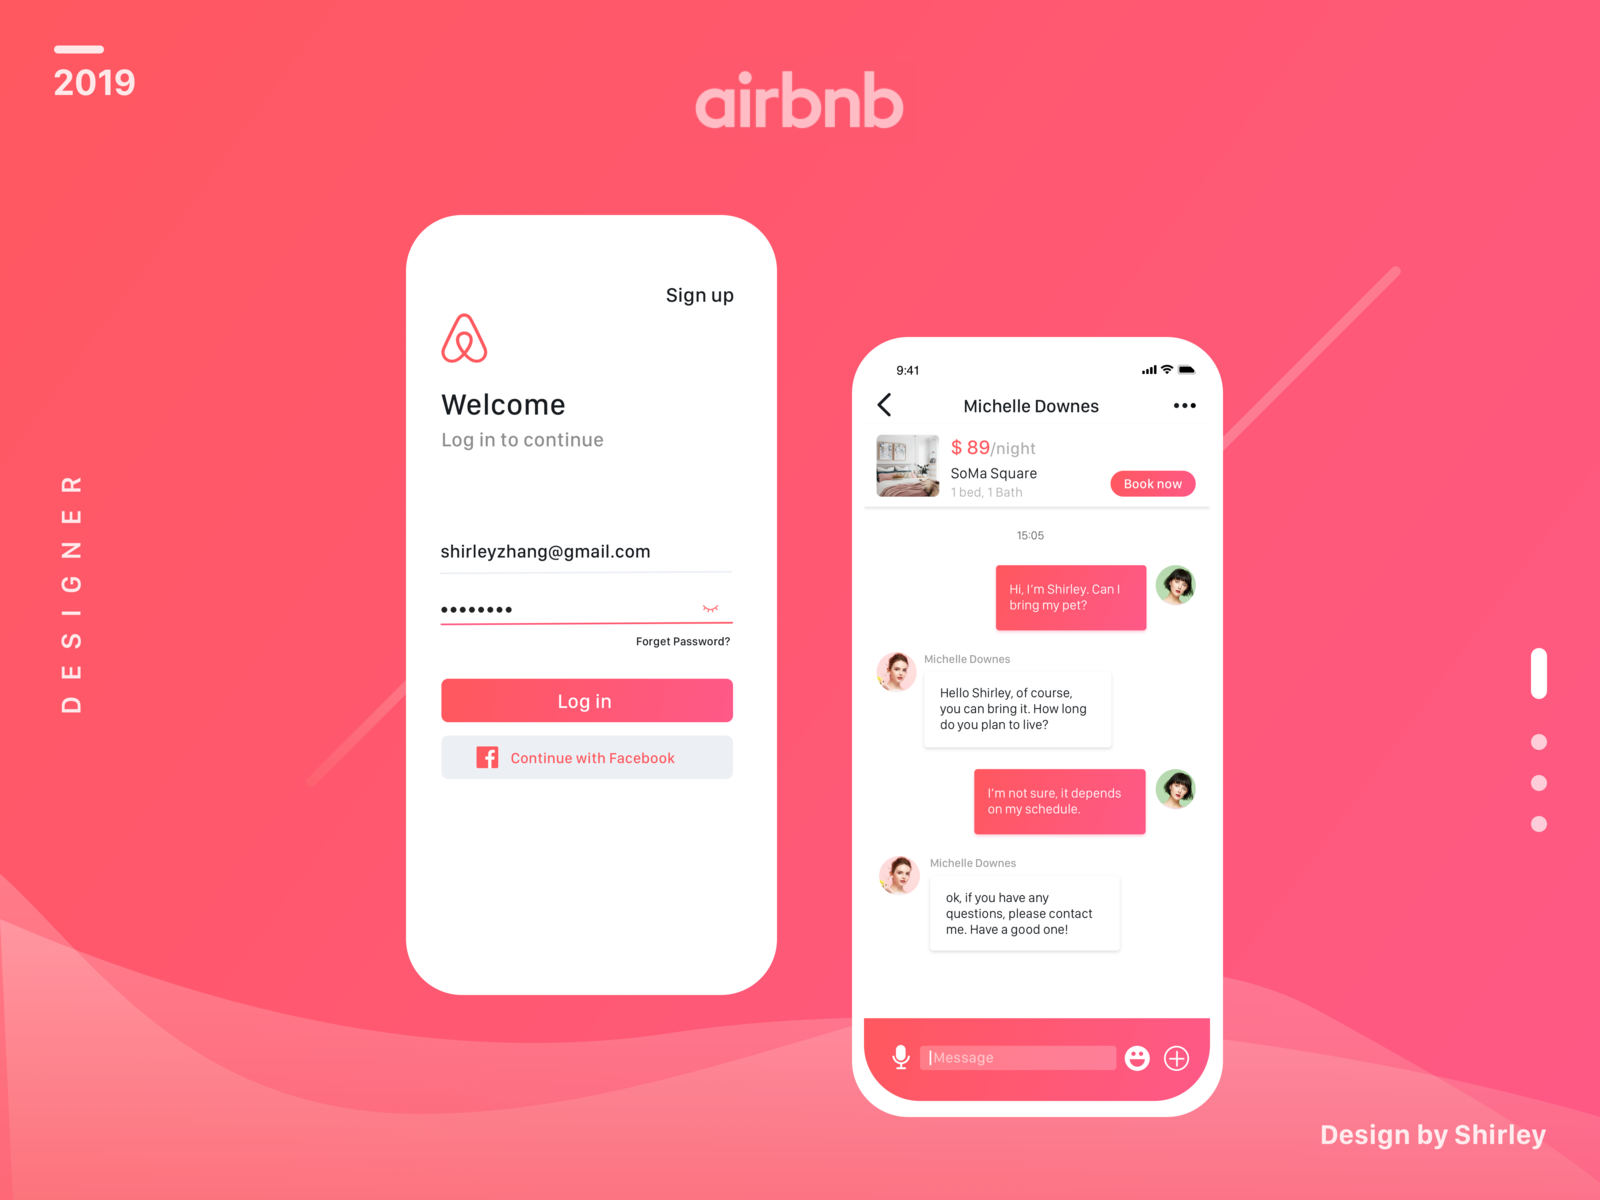 Airbnb live chat help